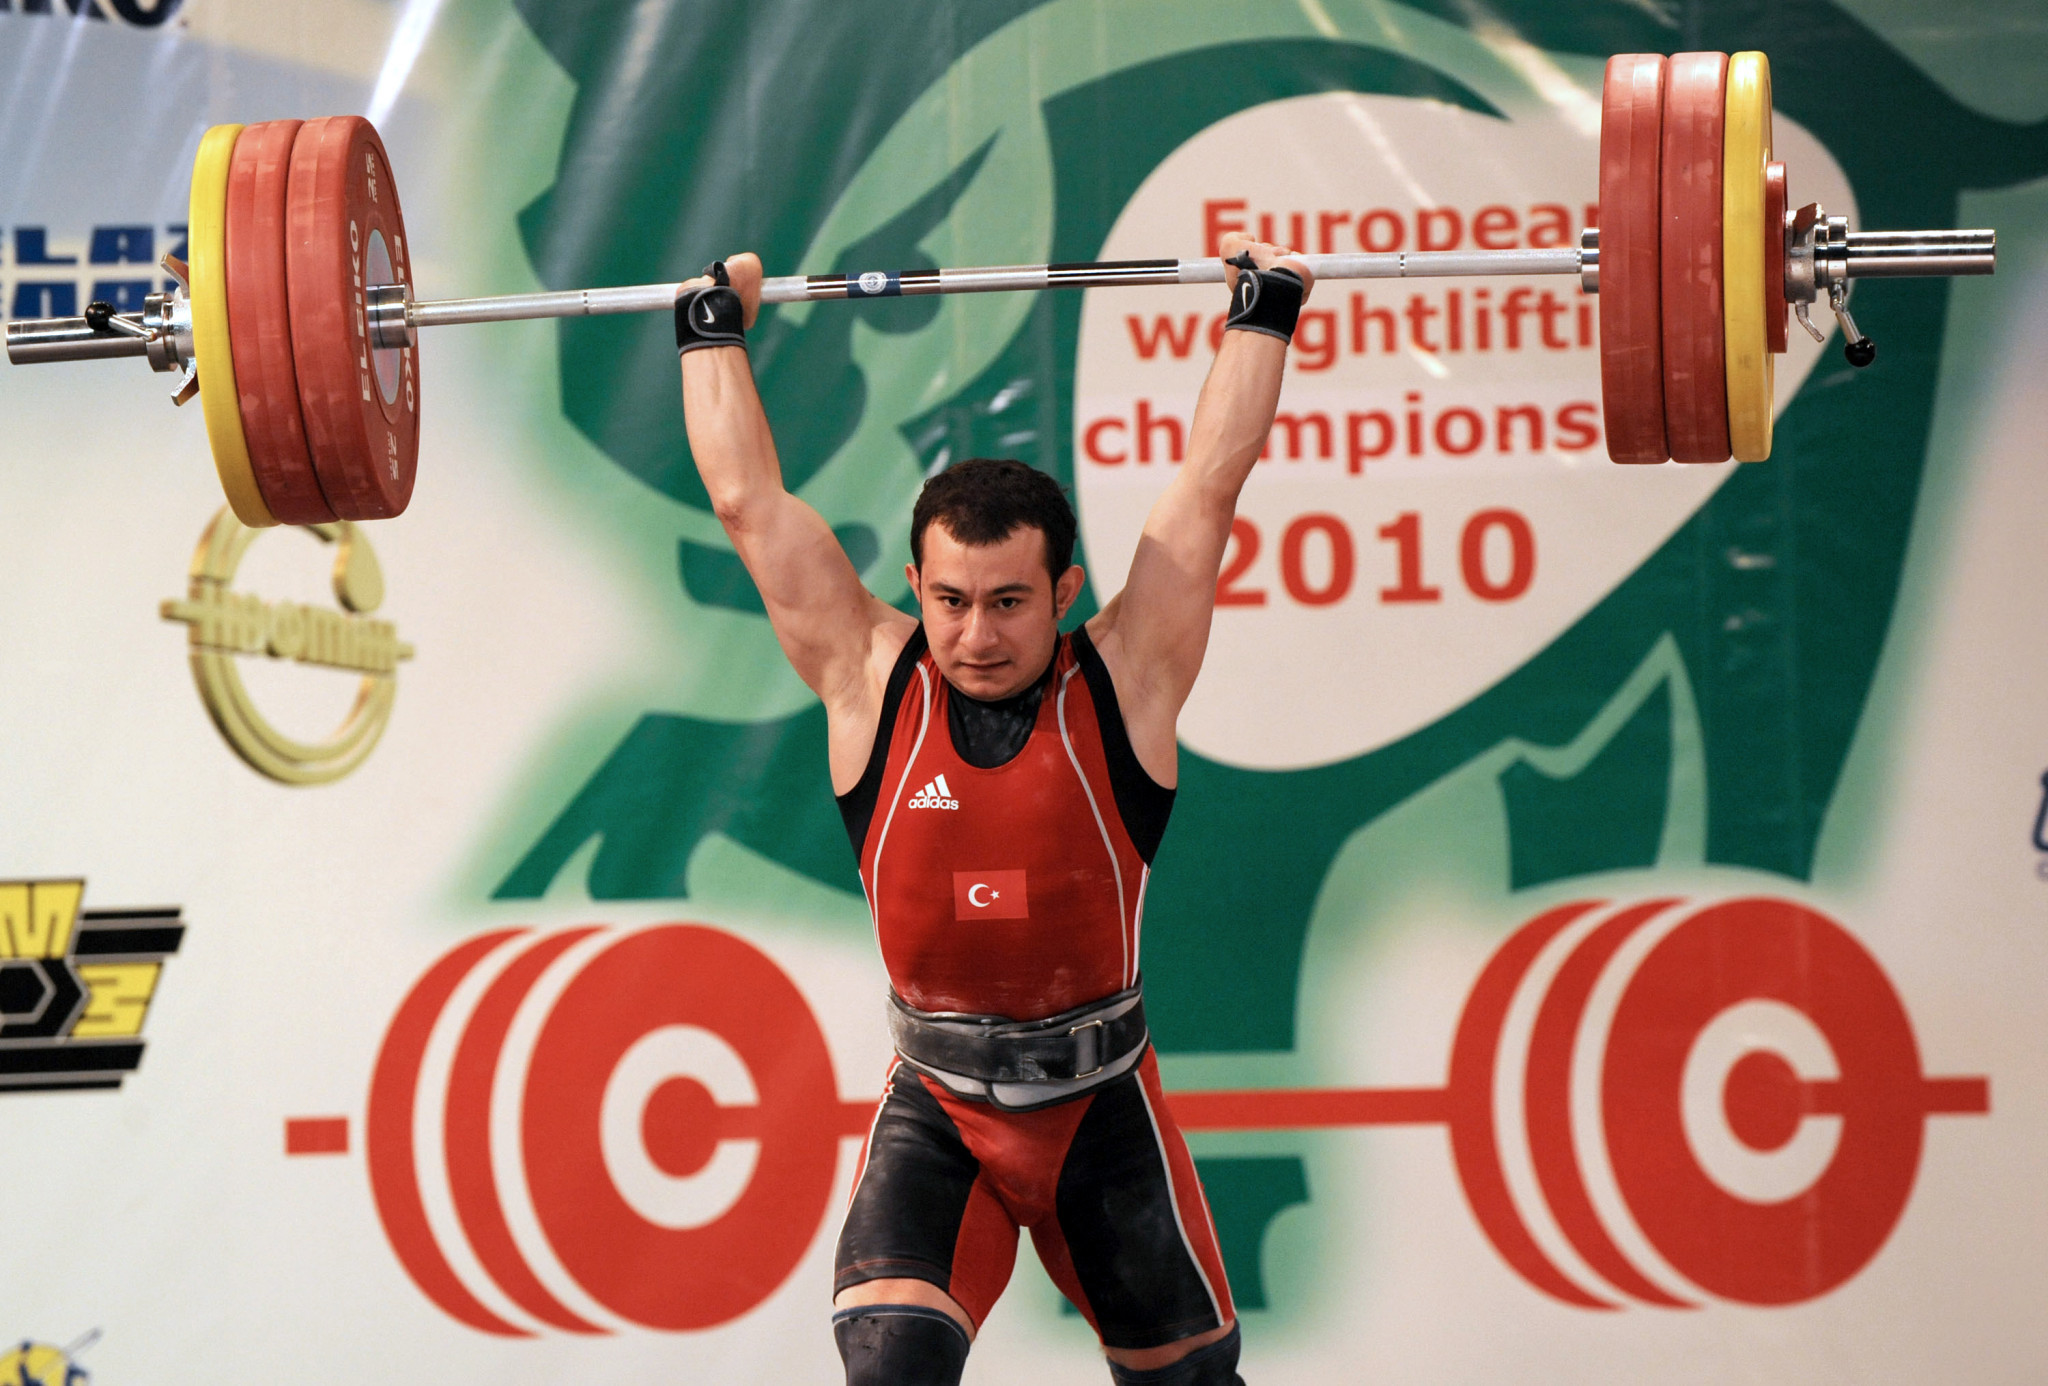 Erol Bilgin claimed European weightlifting titles in 2009 and 2010 ©Getty Images